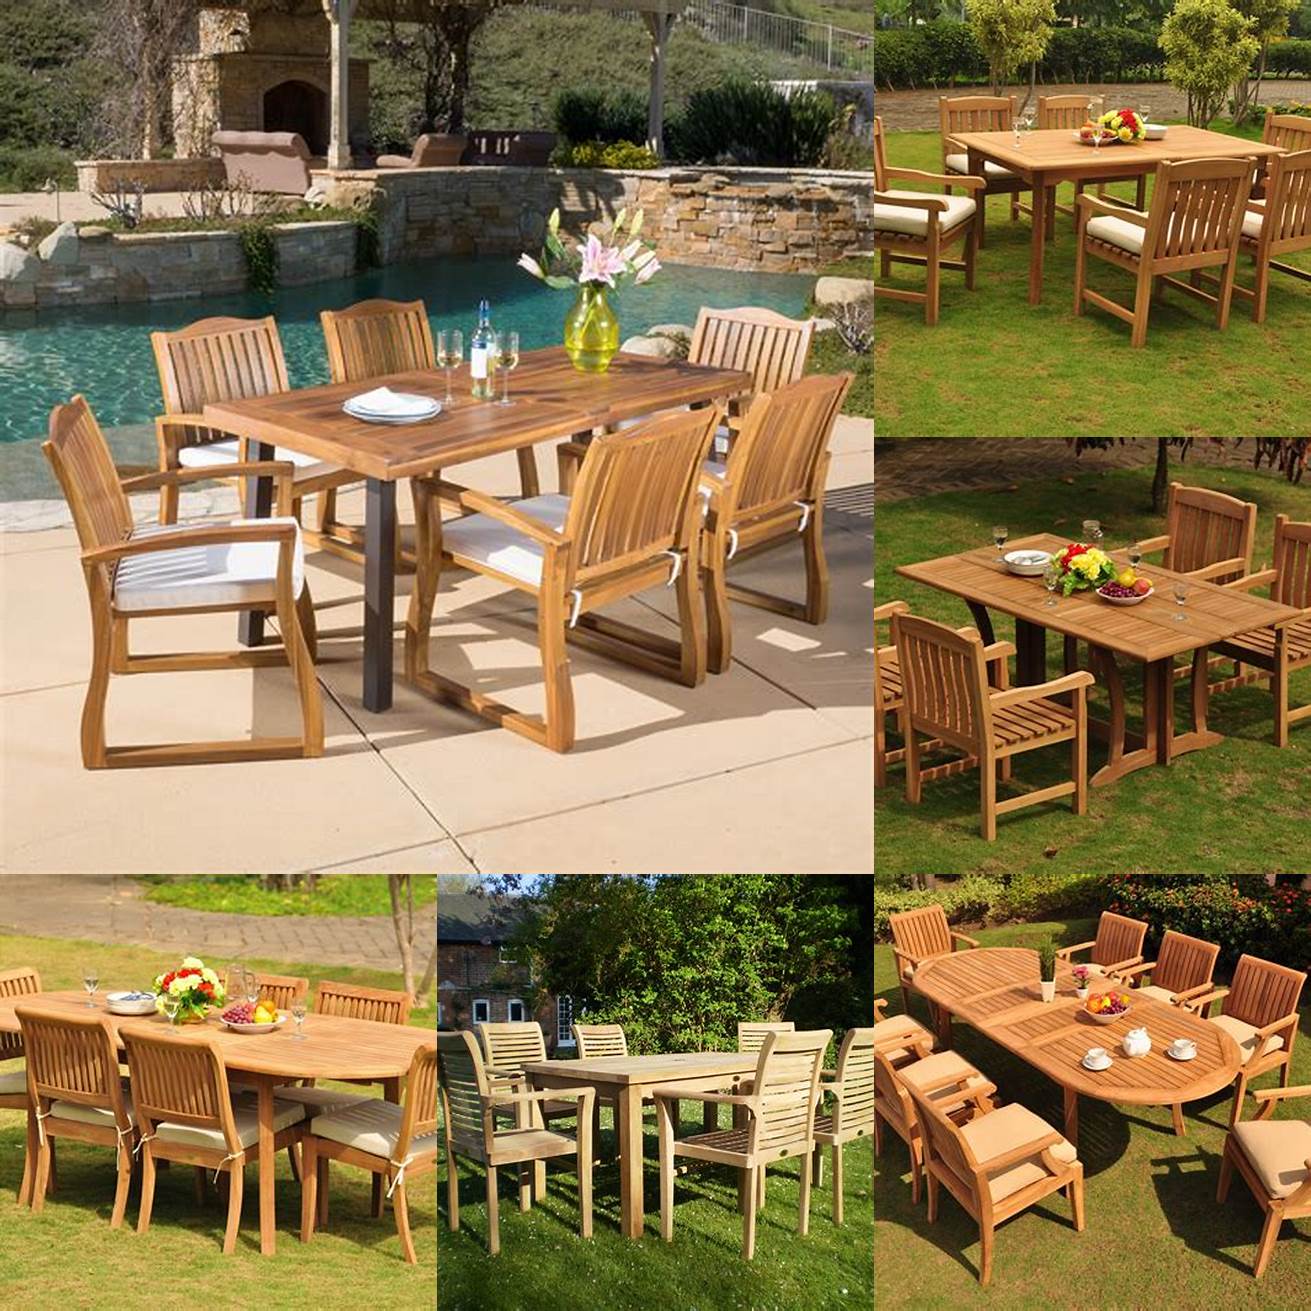 Picture of a person comparing prices of teak garden furniture sets